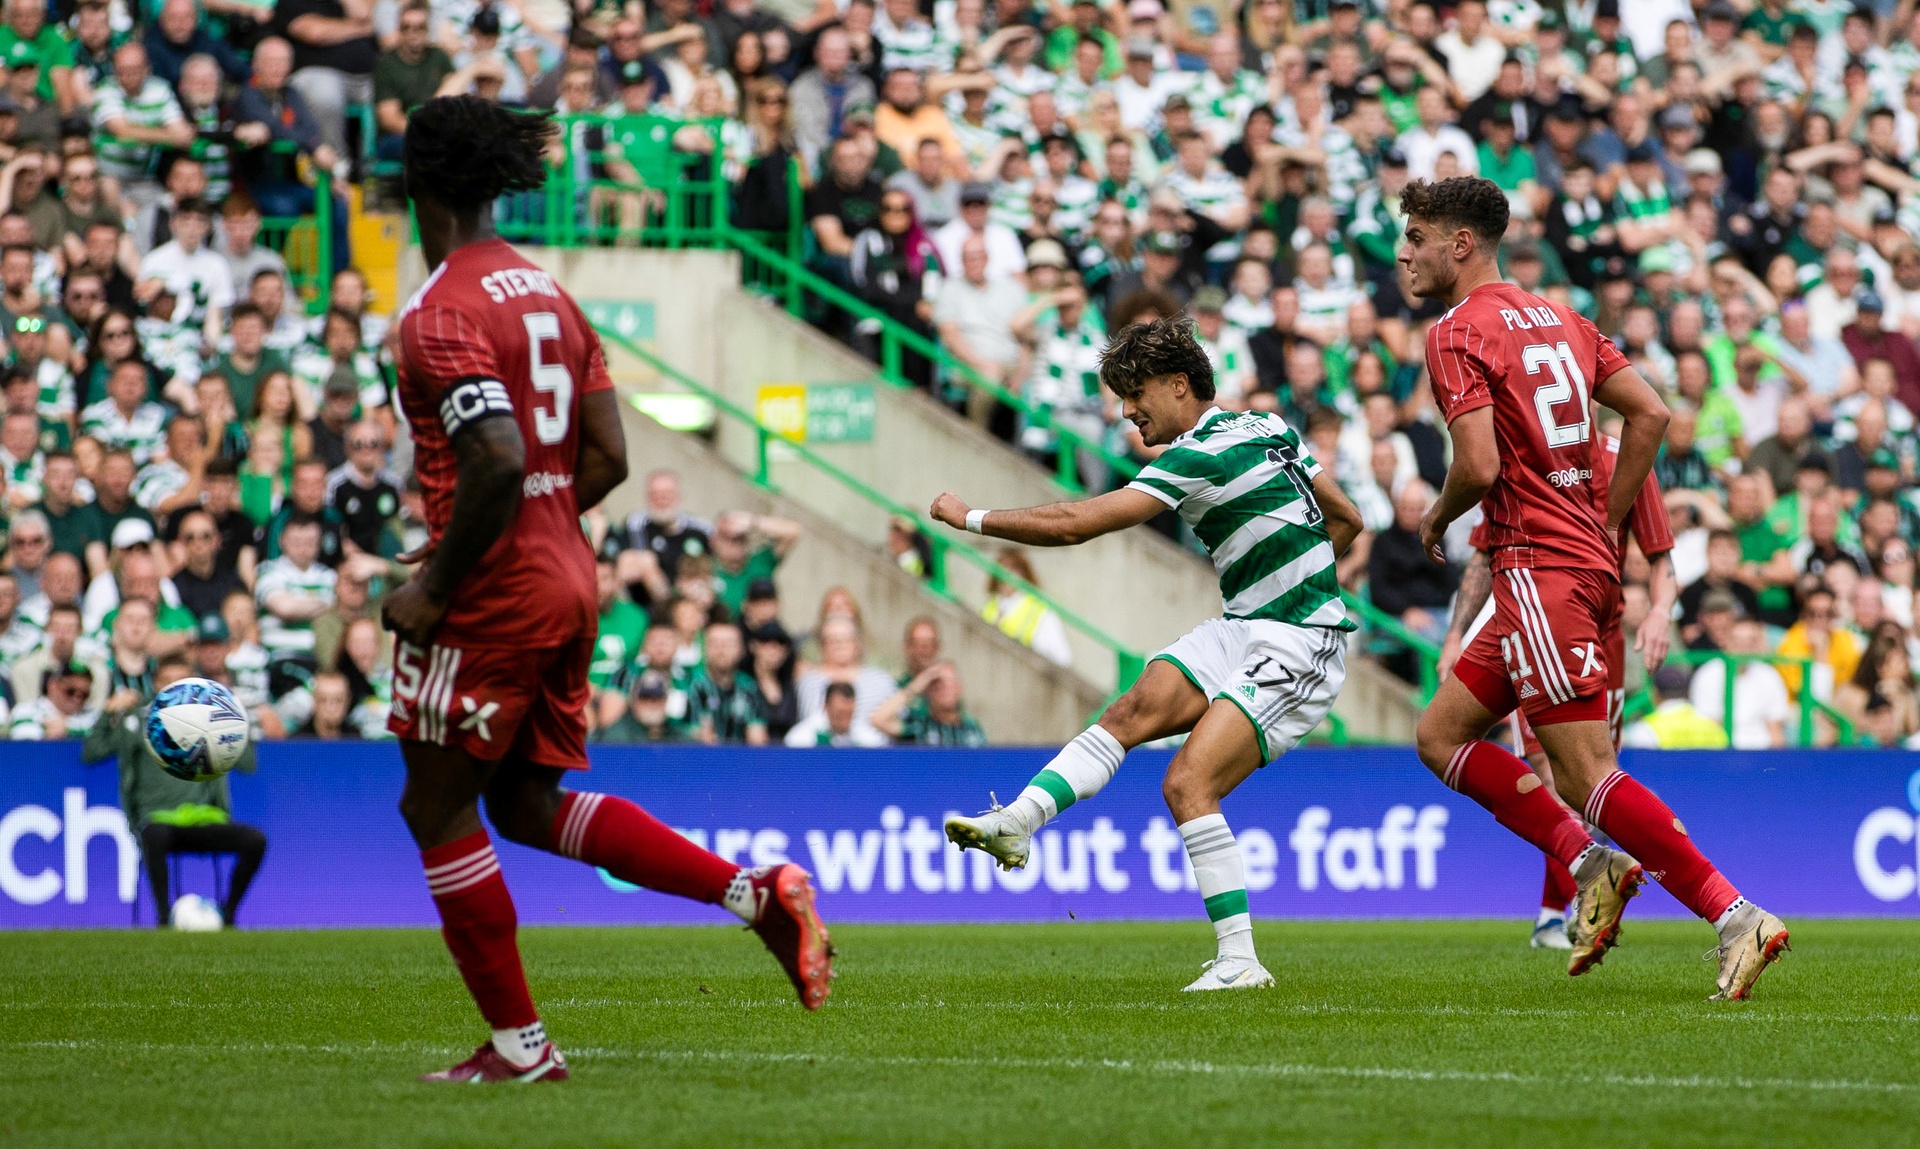 Jota scores to make it 2-0 against Aberdeen in the league opener.